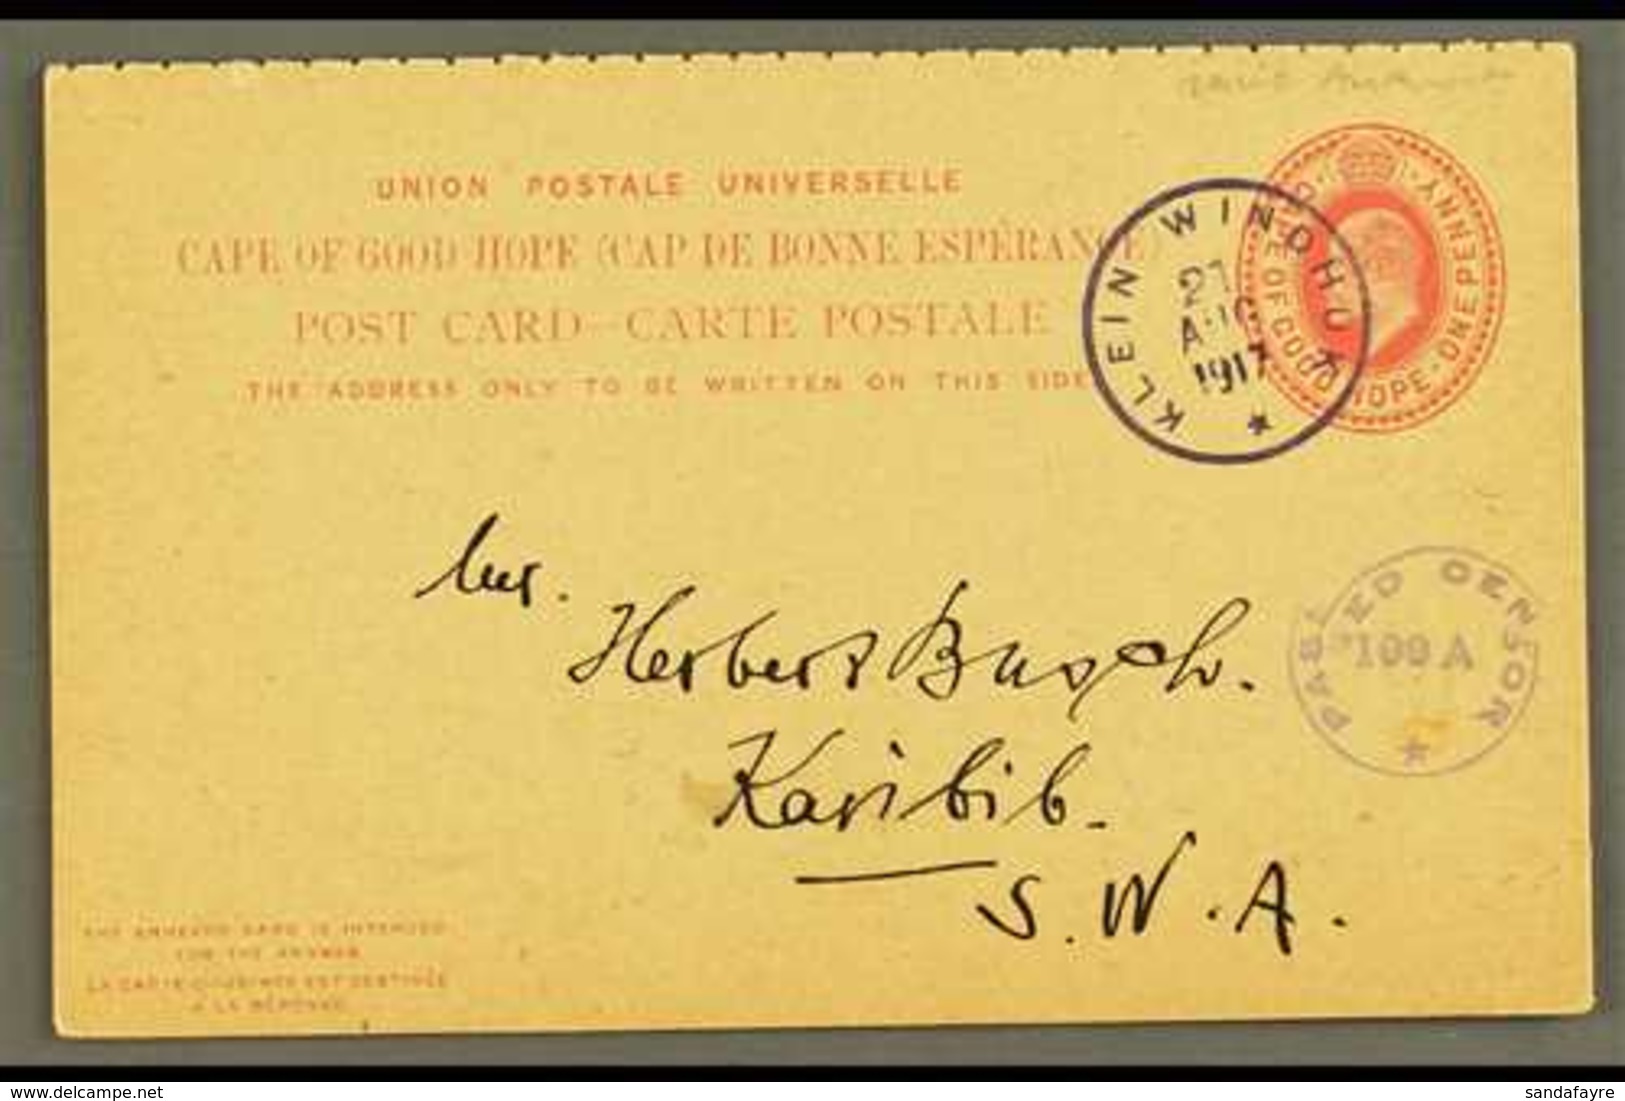 1917  (21 Aug) 1d + 1d KEVII Cape Complete Reply Card To Karibib Cancelled By Superb "KLEIN WINDHUK" Rubber Cds Pmk In D - South West Africa (1923-1990)